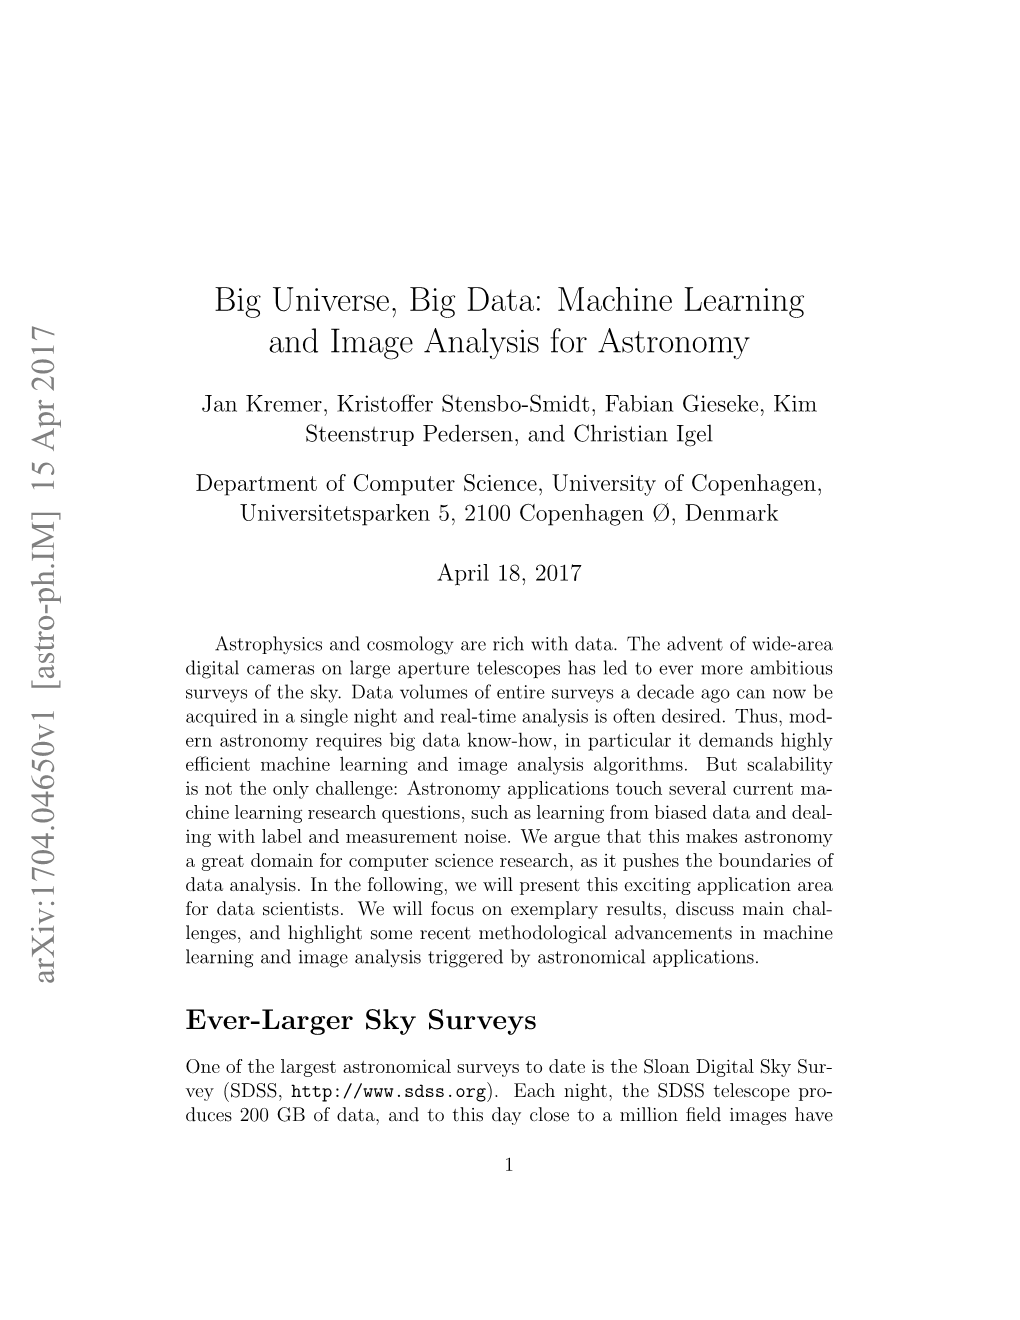 Big Universe, Big Data: Machine Learning and Image Analysis for Astronomy